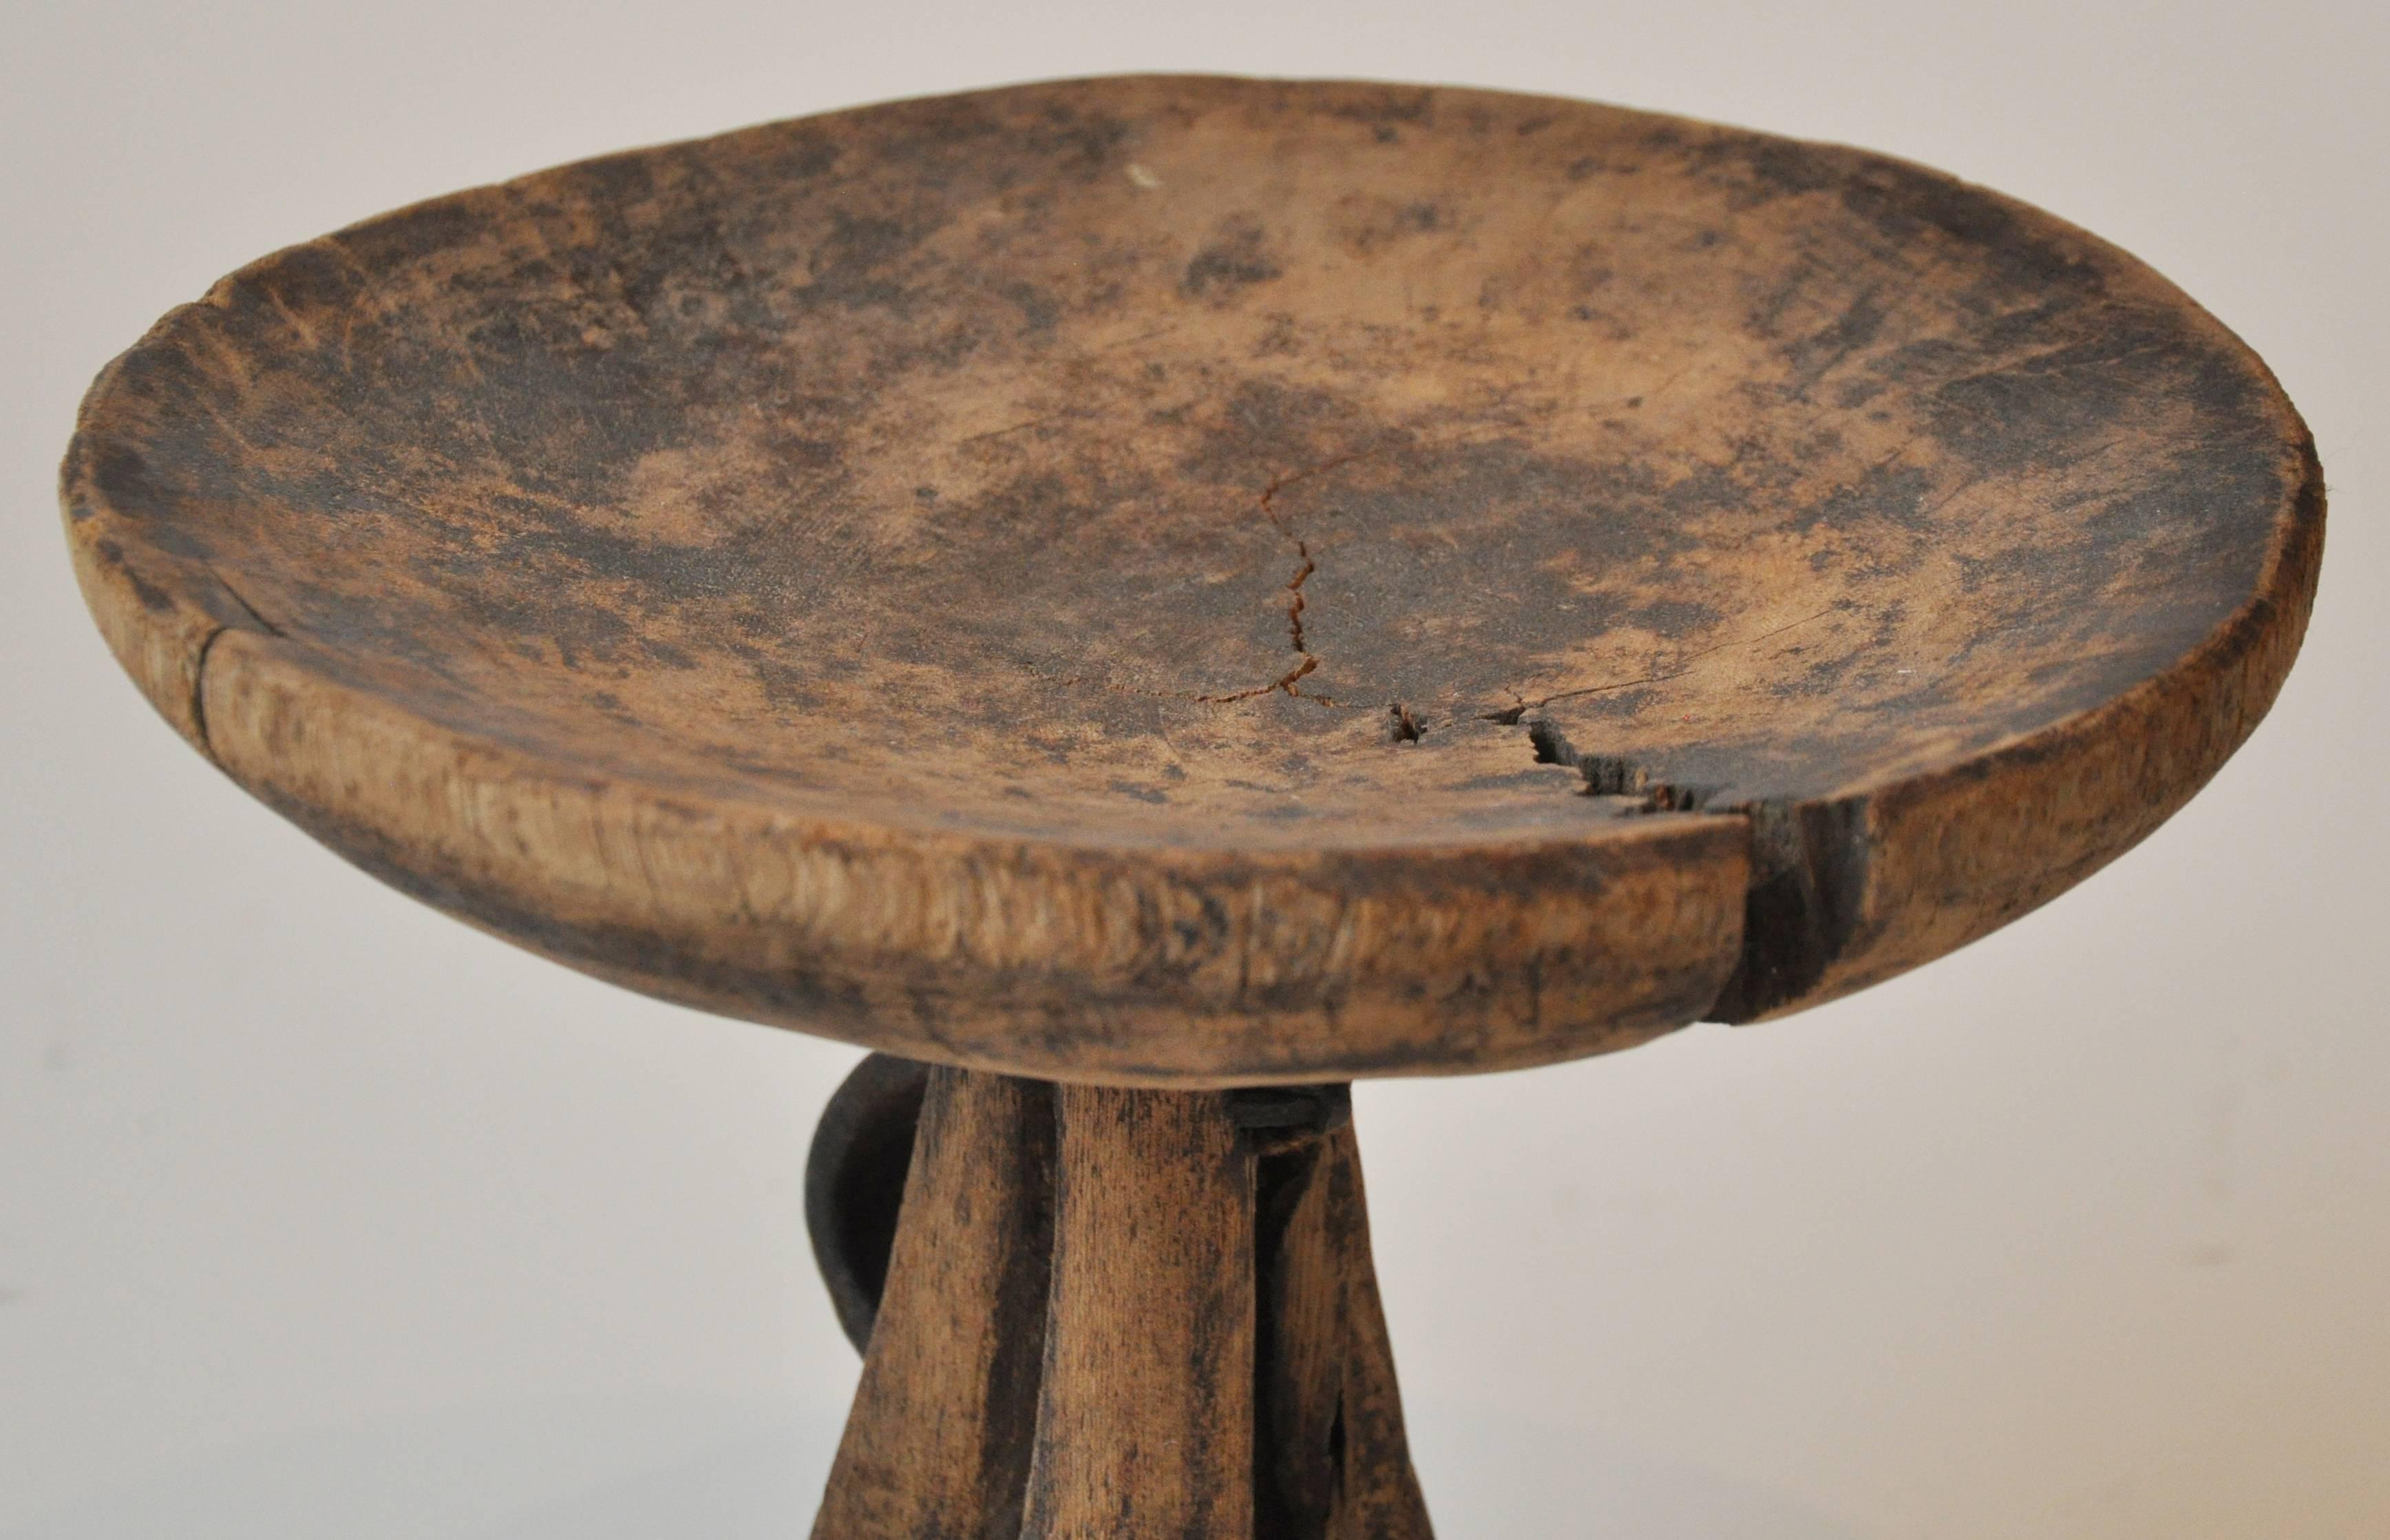 20th century African food serving tray. Handcrafted from wood. The pedestal features a metal handle. Naturally aged and discolored from use. Crack does not impact the structure of piece. 

 